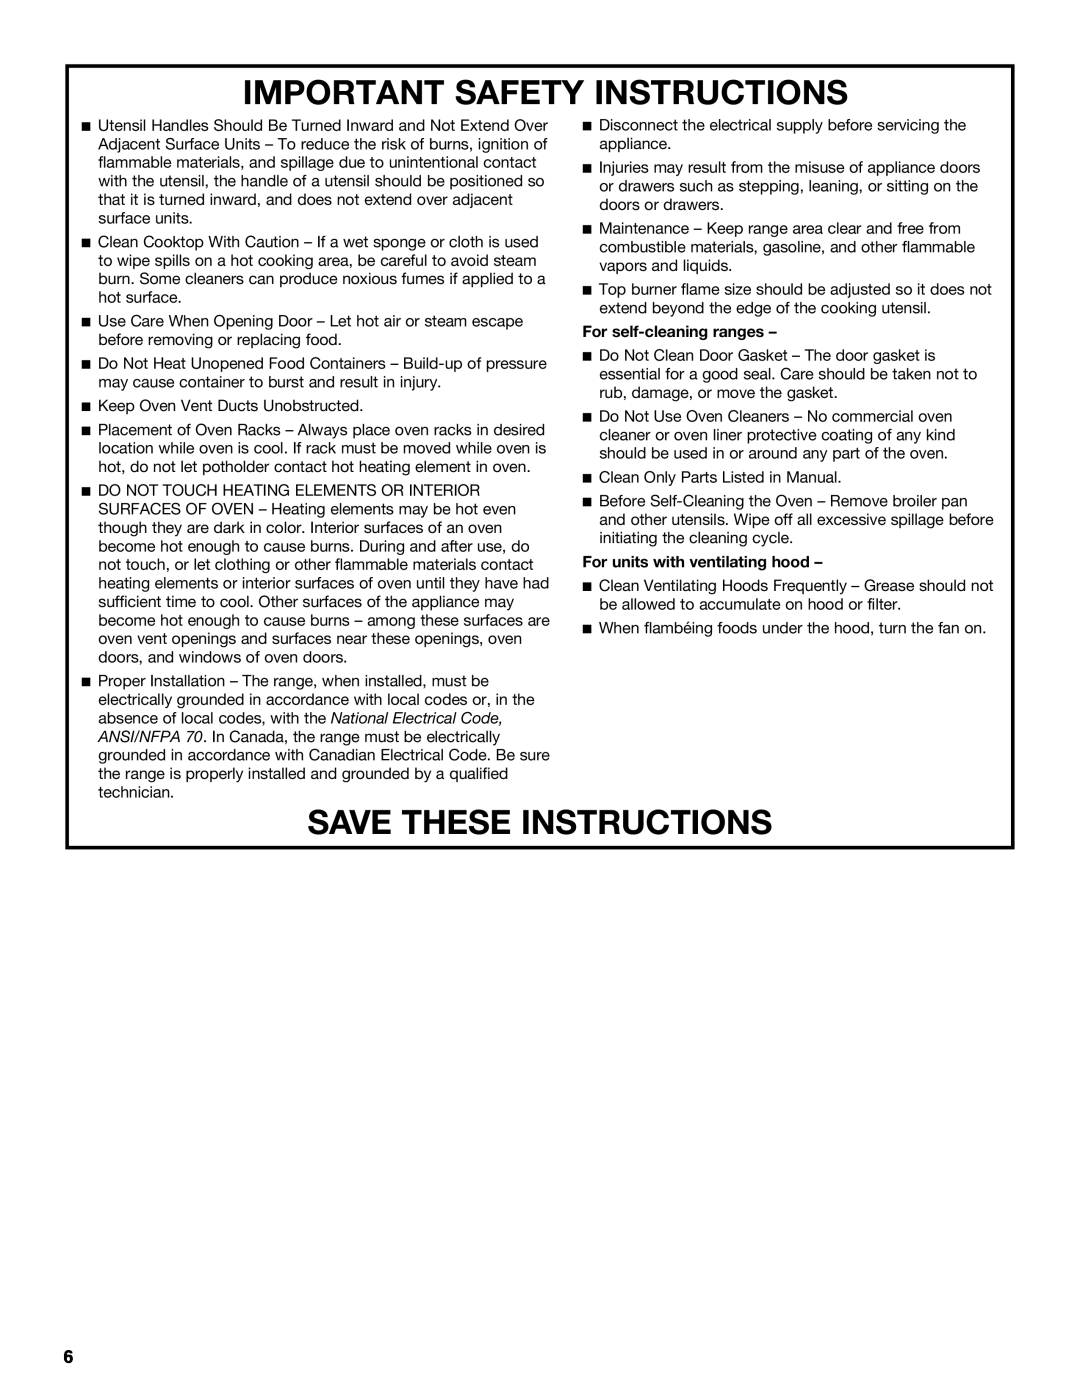 KitchenAid KDRU763.KDRU manual Important Safety Instructions, Save These Instructions, For self-cleaning ranges 